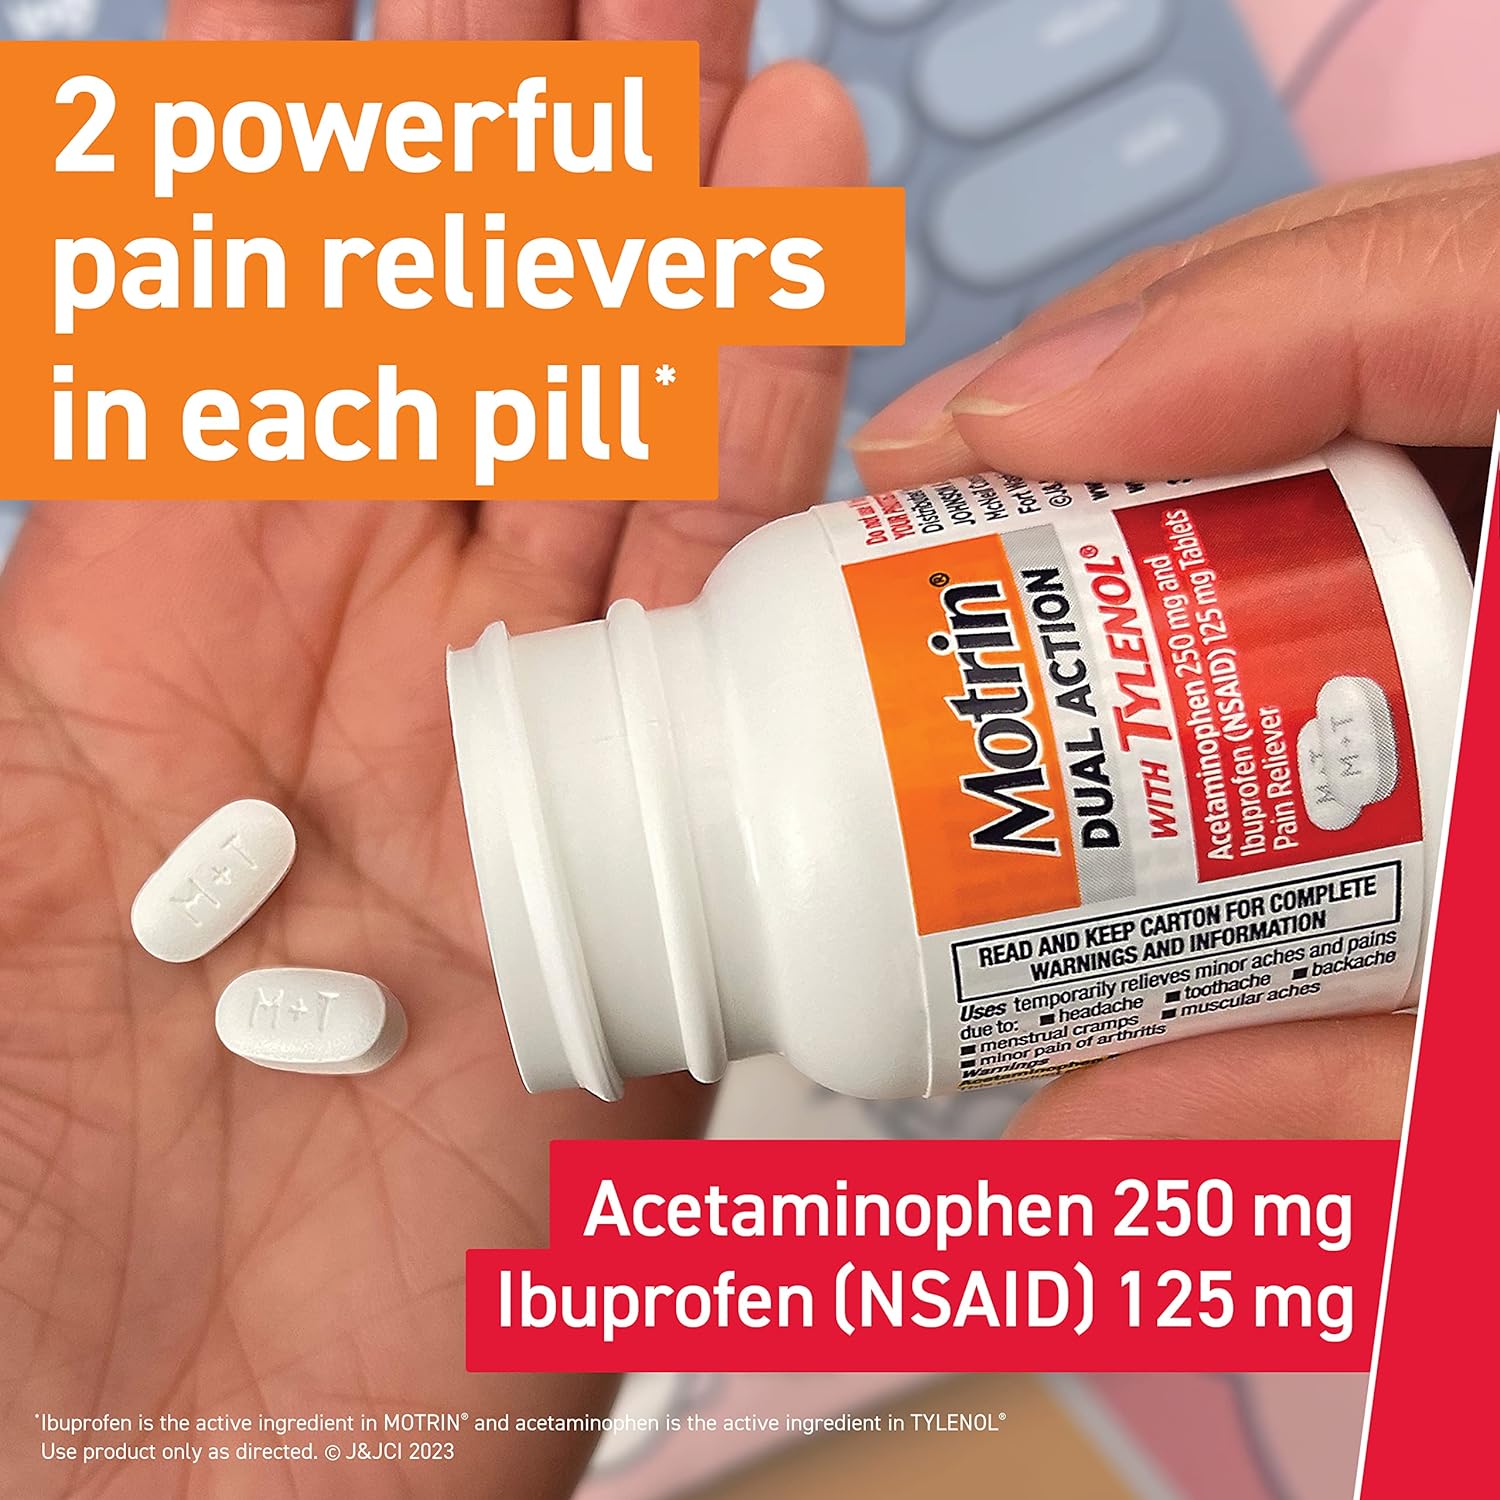 Motrin Dual Action with Tylenol, Pain Reliever Ibuprofen & Acetaminophen, Two Medicines for Minor Aches Pains, (NSAID) 125 mg Acetaminophen 250 mg, 120 ct : Health & Household